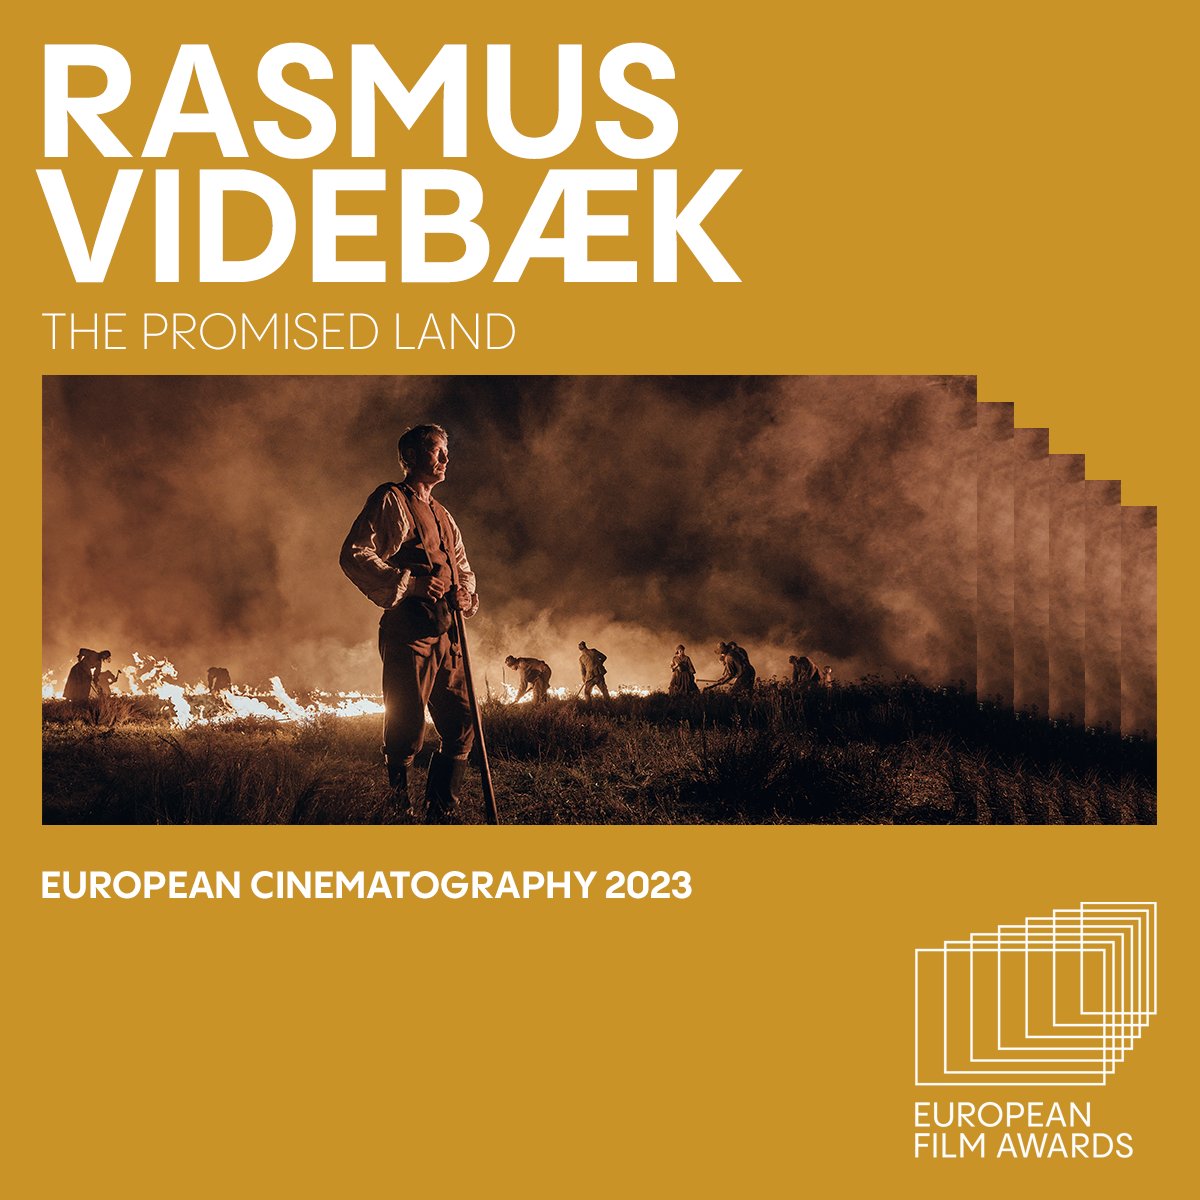 The award for European Cinematography 2023 goes to Rasmus Videbæk for THE PROMISED LAND. 🎥 Congratulations! 👏🏼 #europeanfilmawards #monthofeuropeanfilm